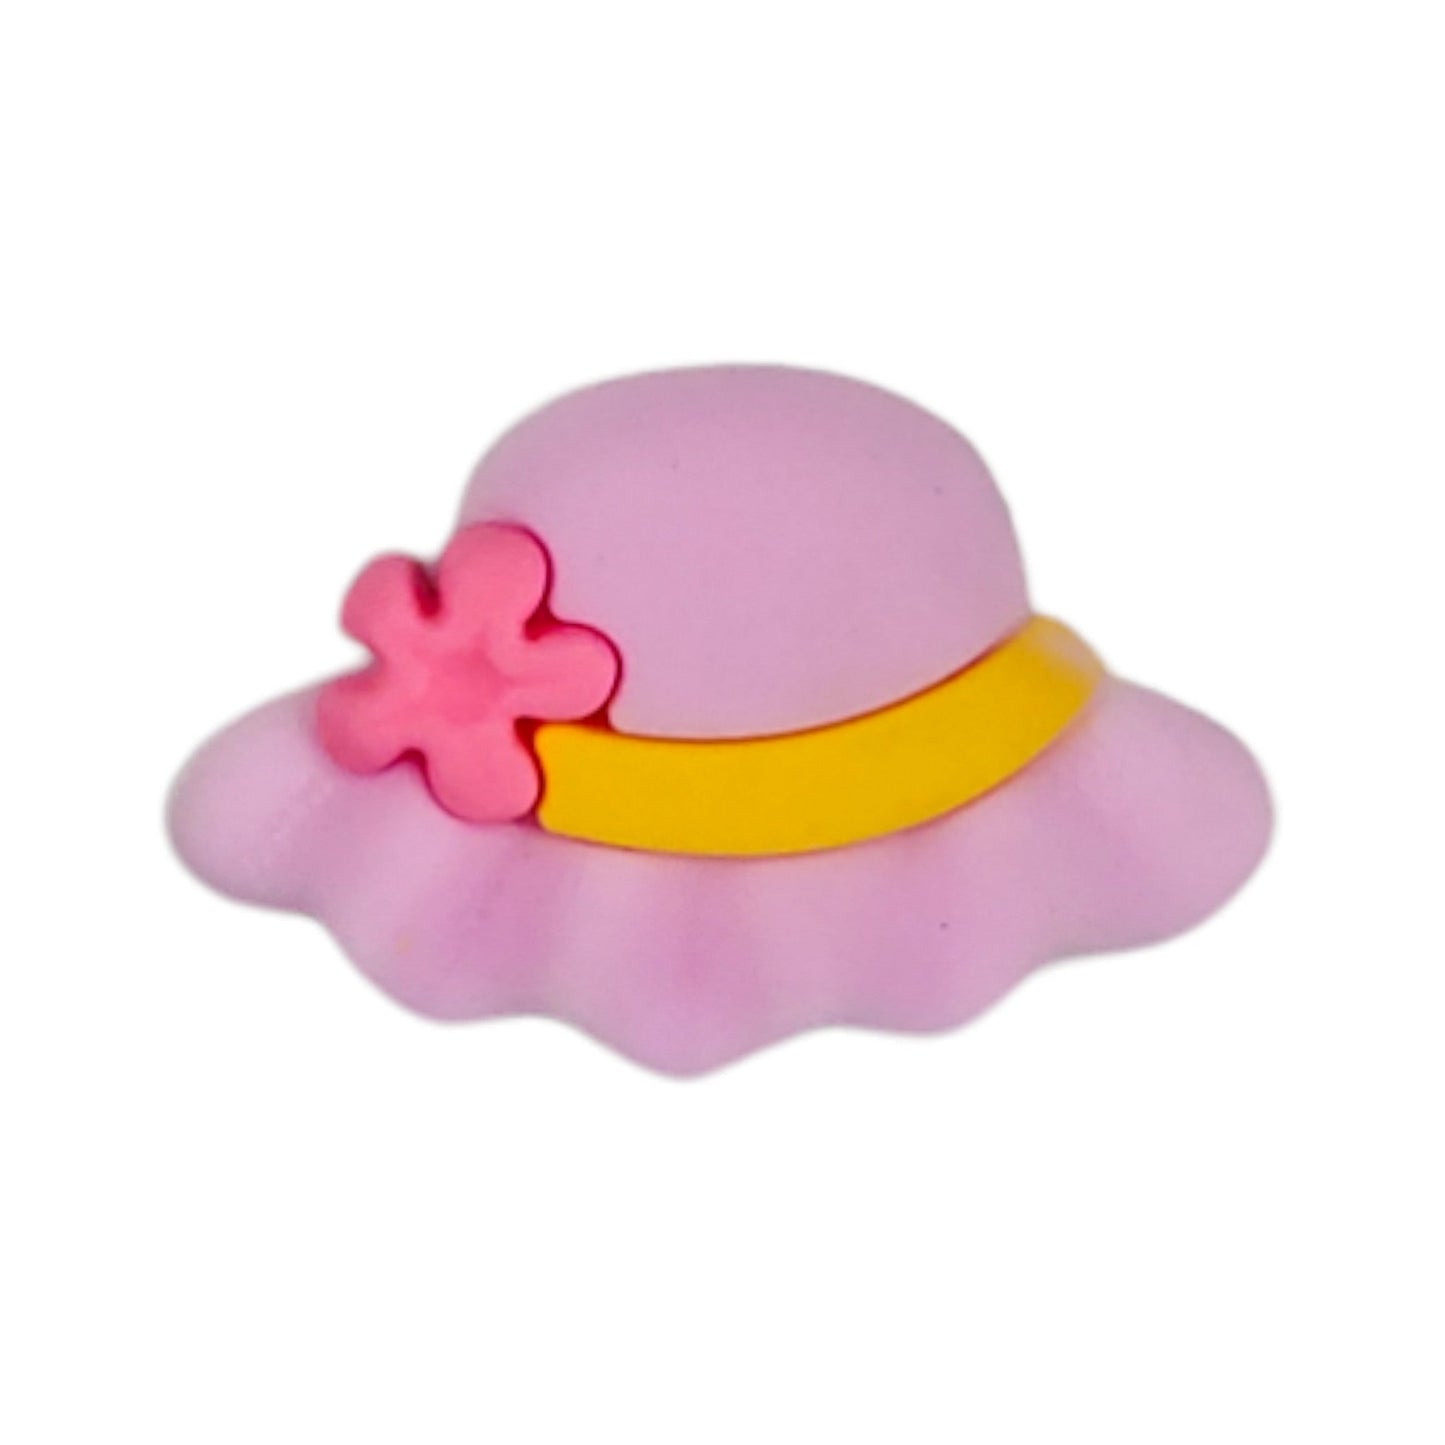 Hat Shape Soft Silicon Resin Motif for Craft or Decoration, 60 Pcs, Mix - 13545